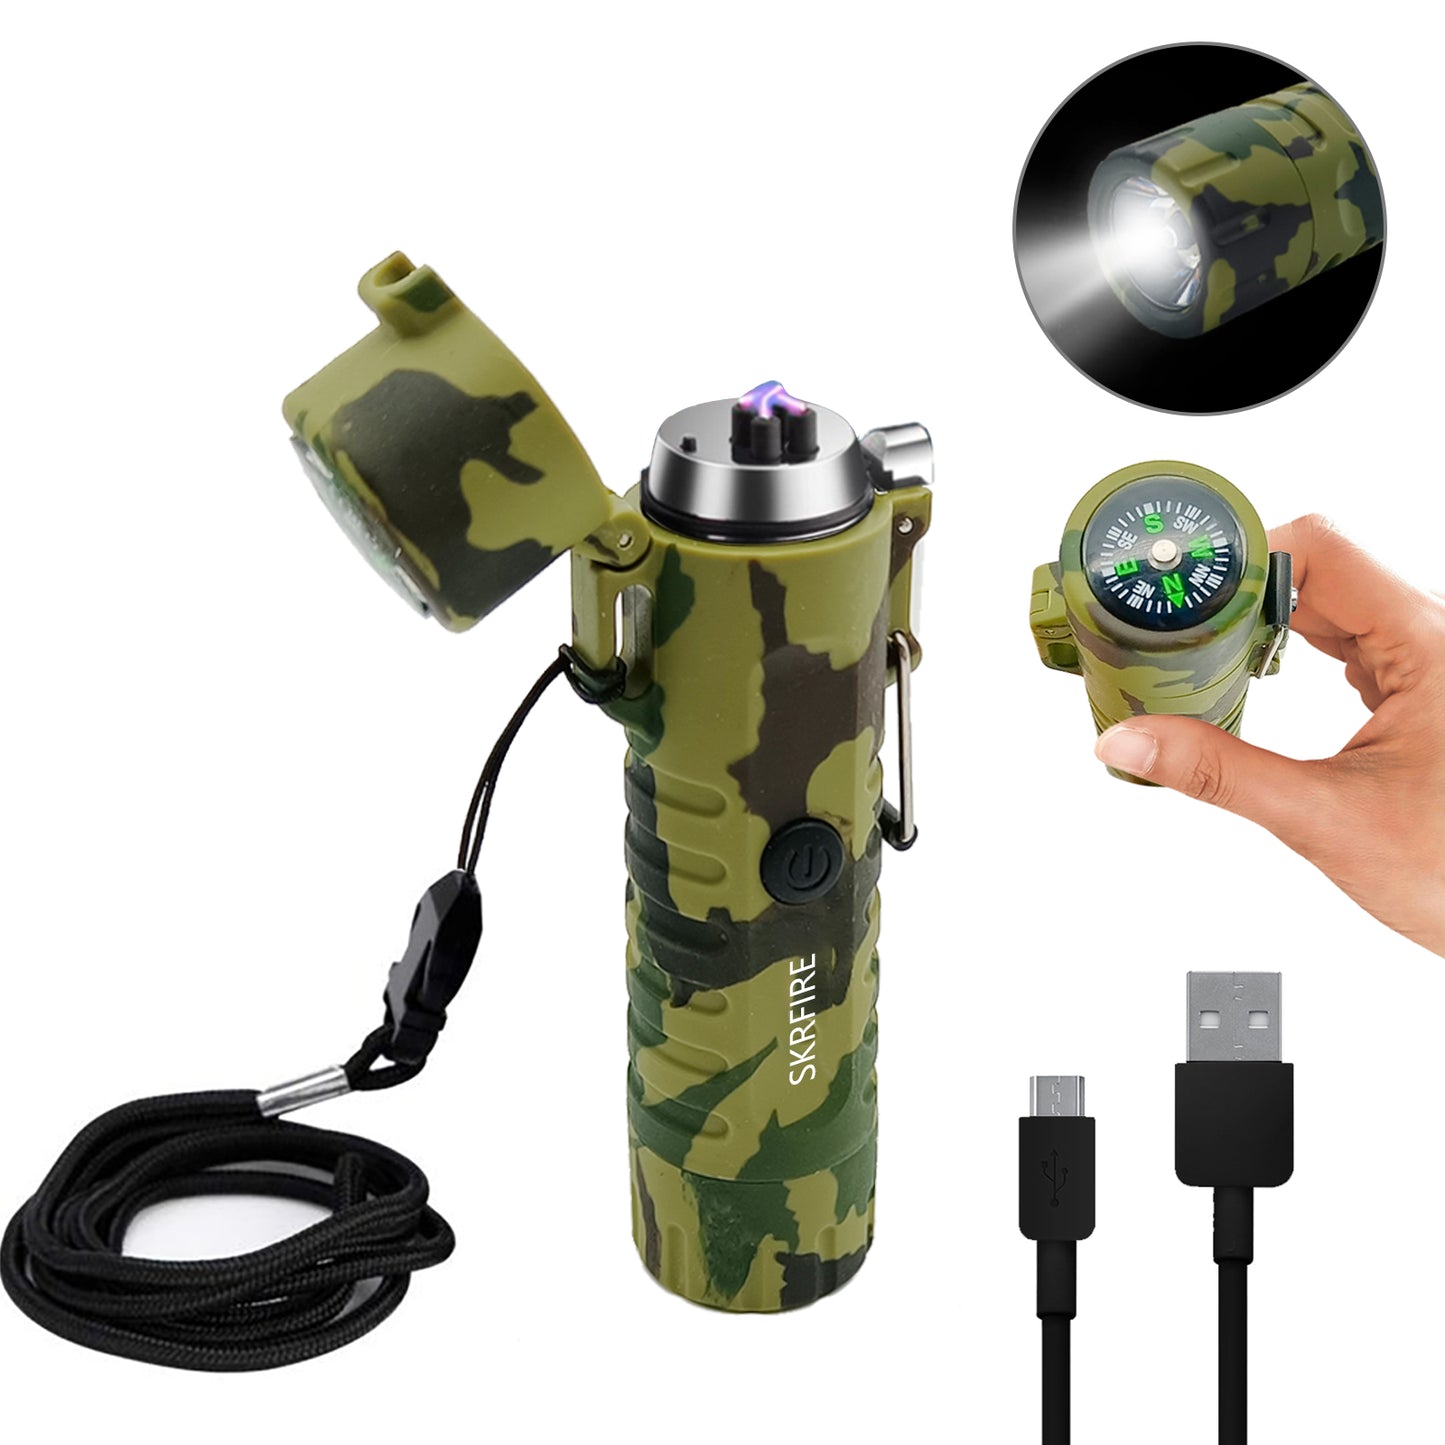 SKRFIRE Waterproof Windproof Outdoor Lighter USB Rechargeable Double Arc Plasma Electric Lighter with Flashlight Compass for Lighting, Camping, Survival, Tactical